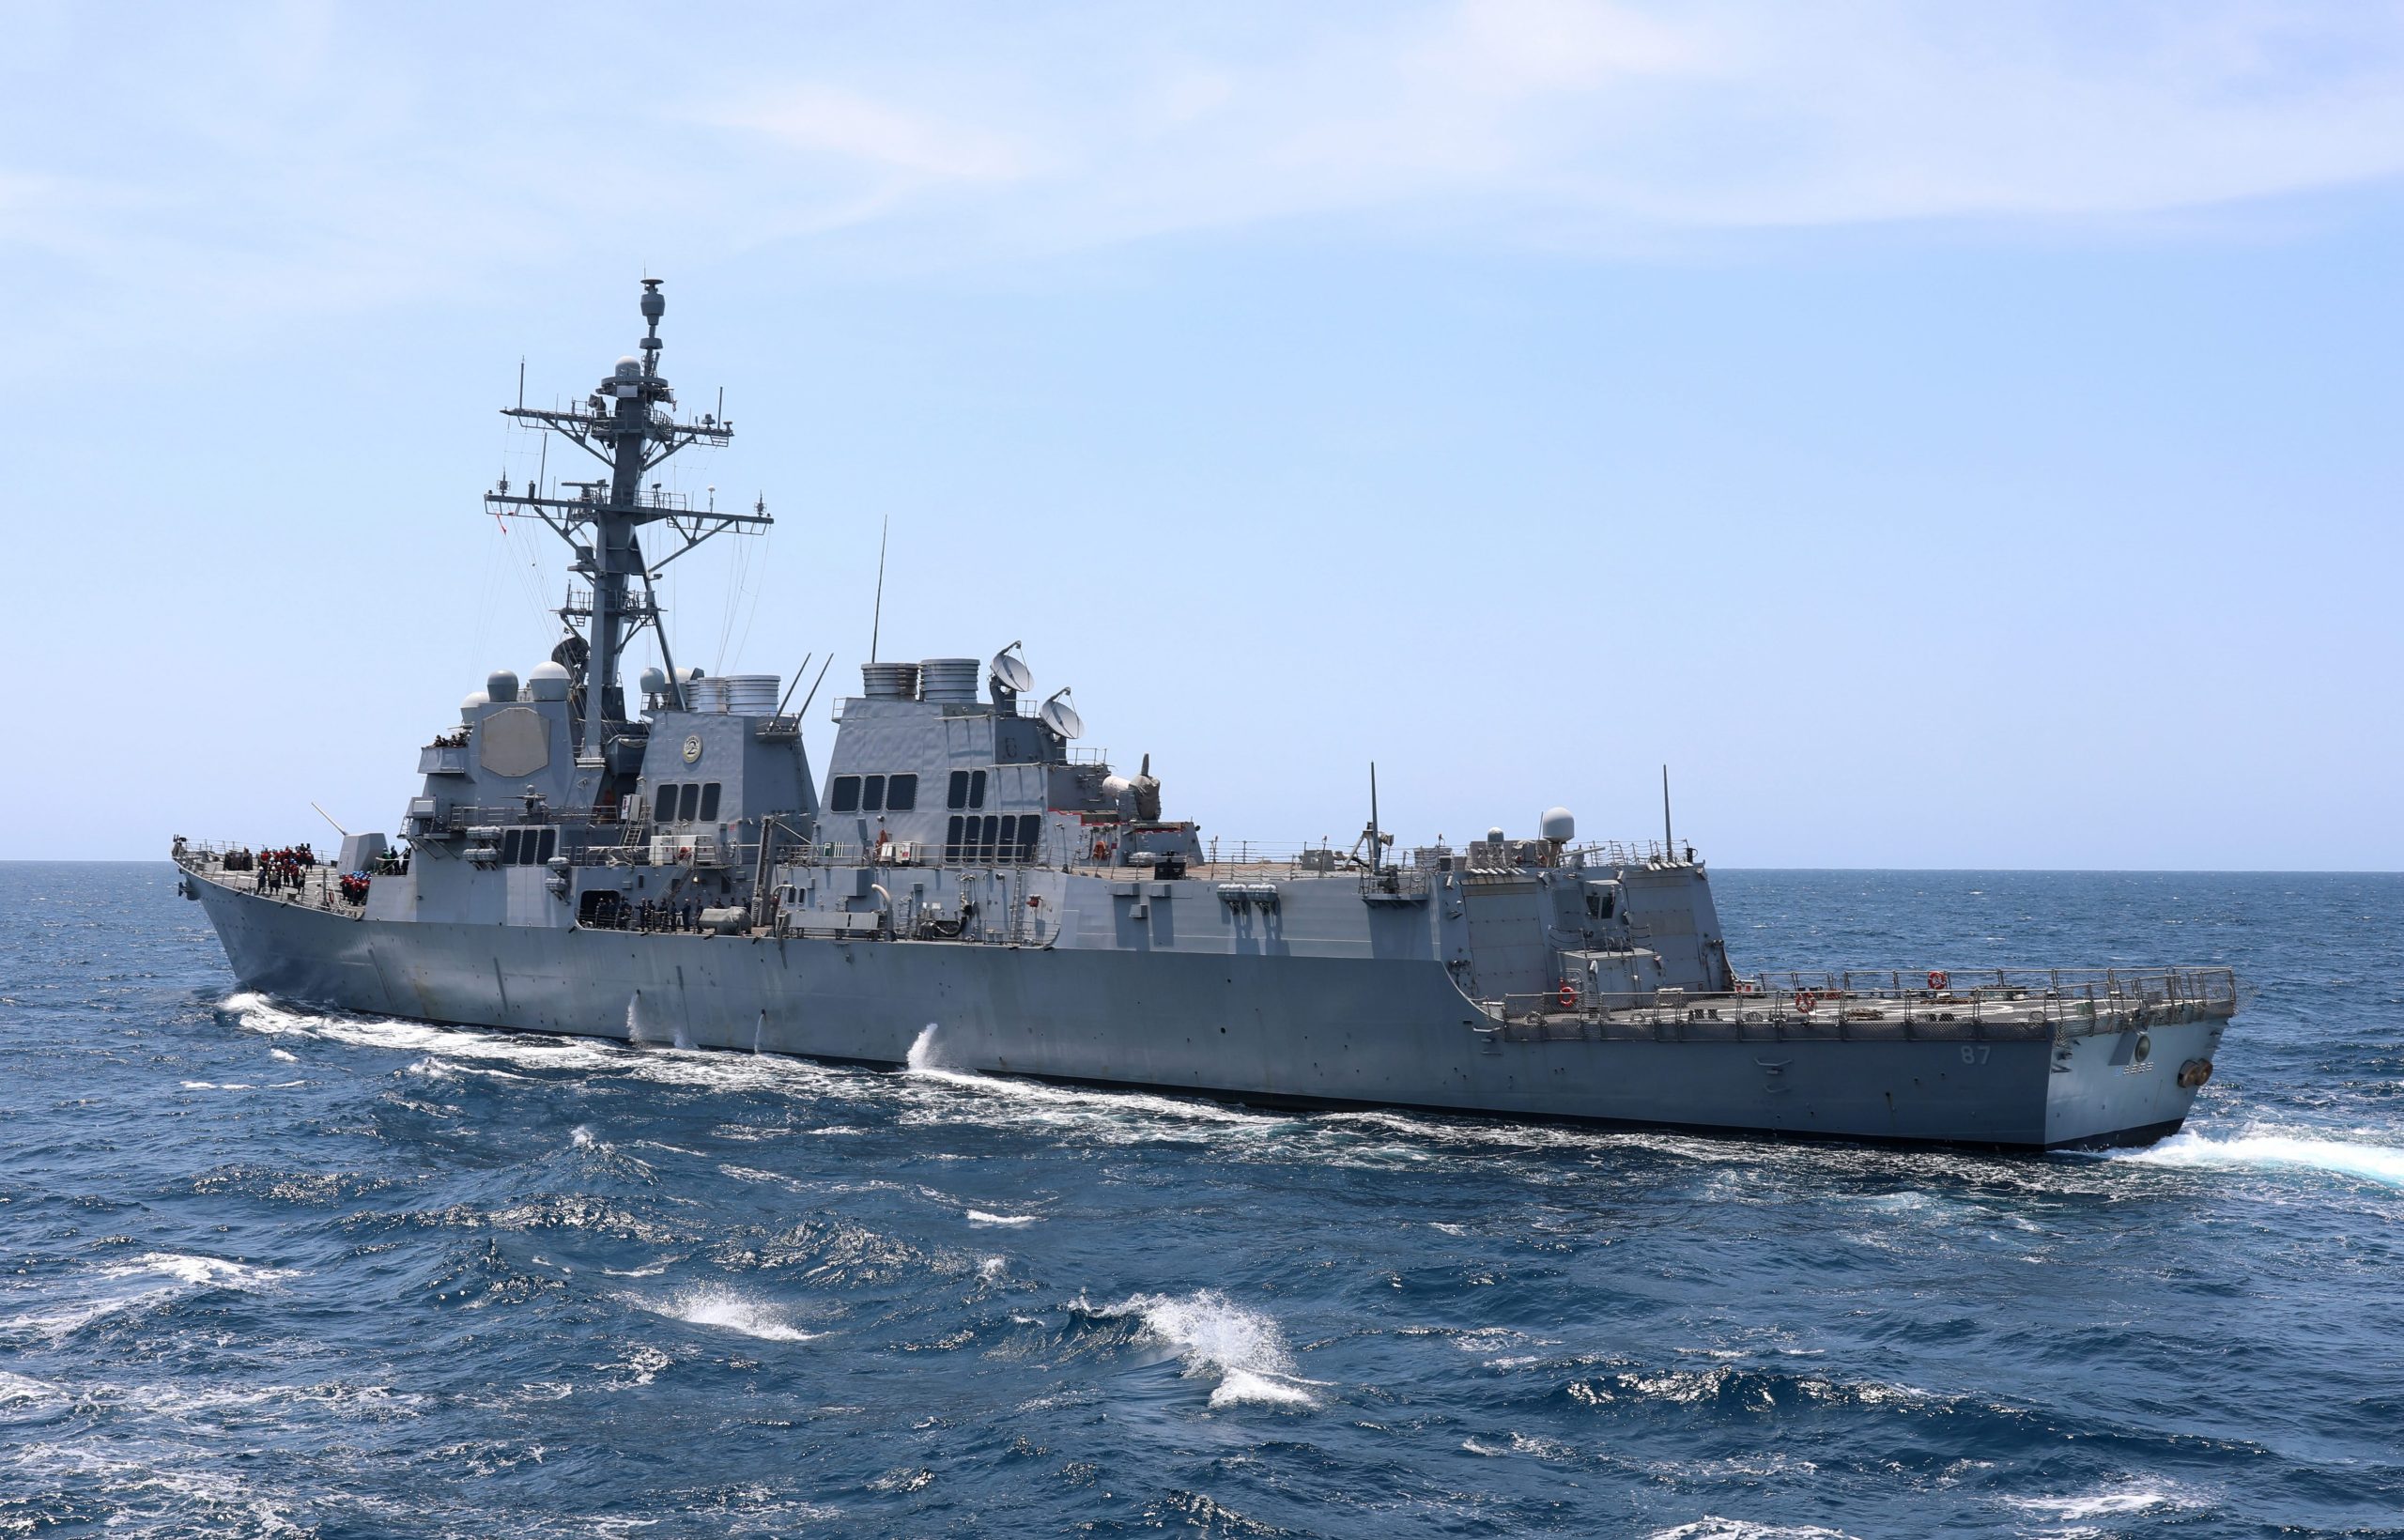 U.S. Navy Detains 5 After Failed Attempt to Capture Merchant Ship, IKE in Persian Gulf